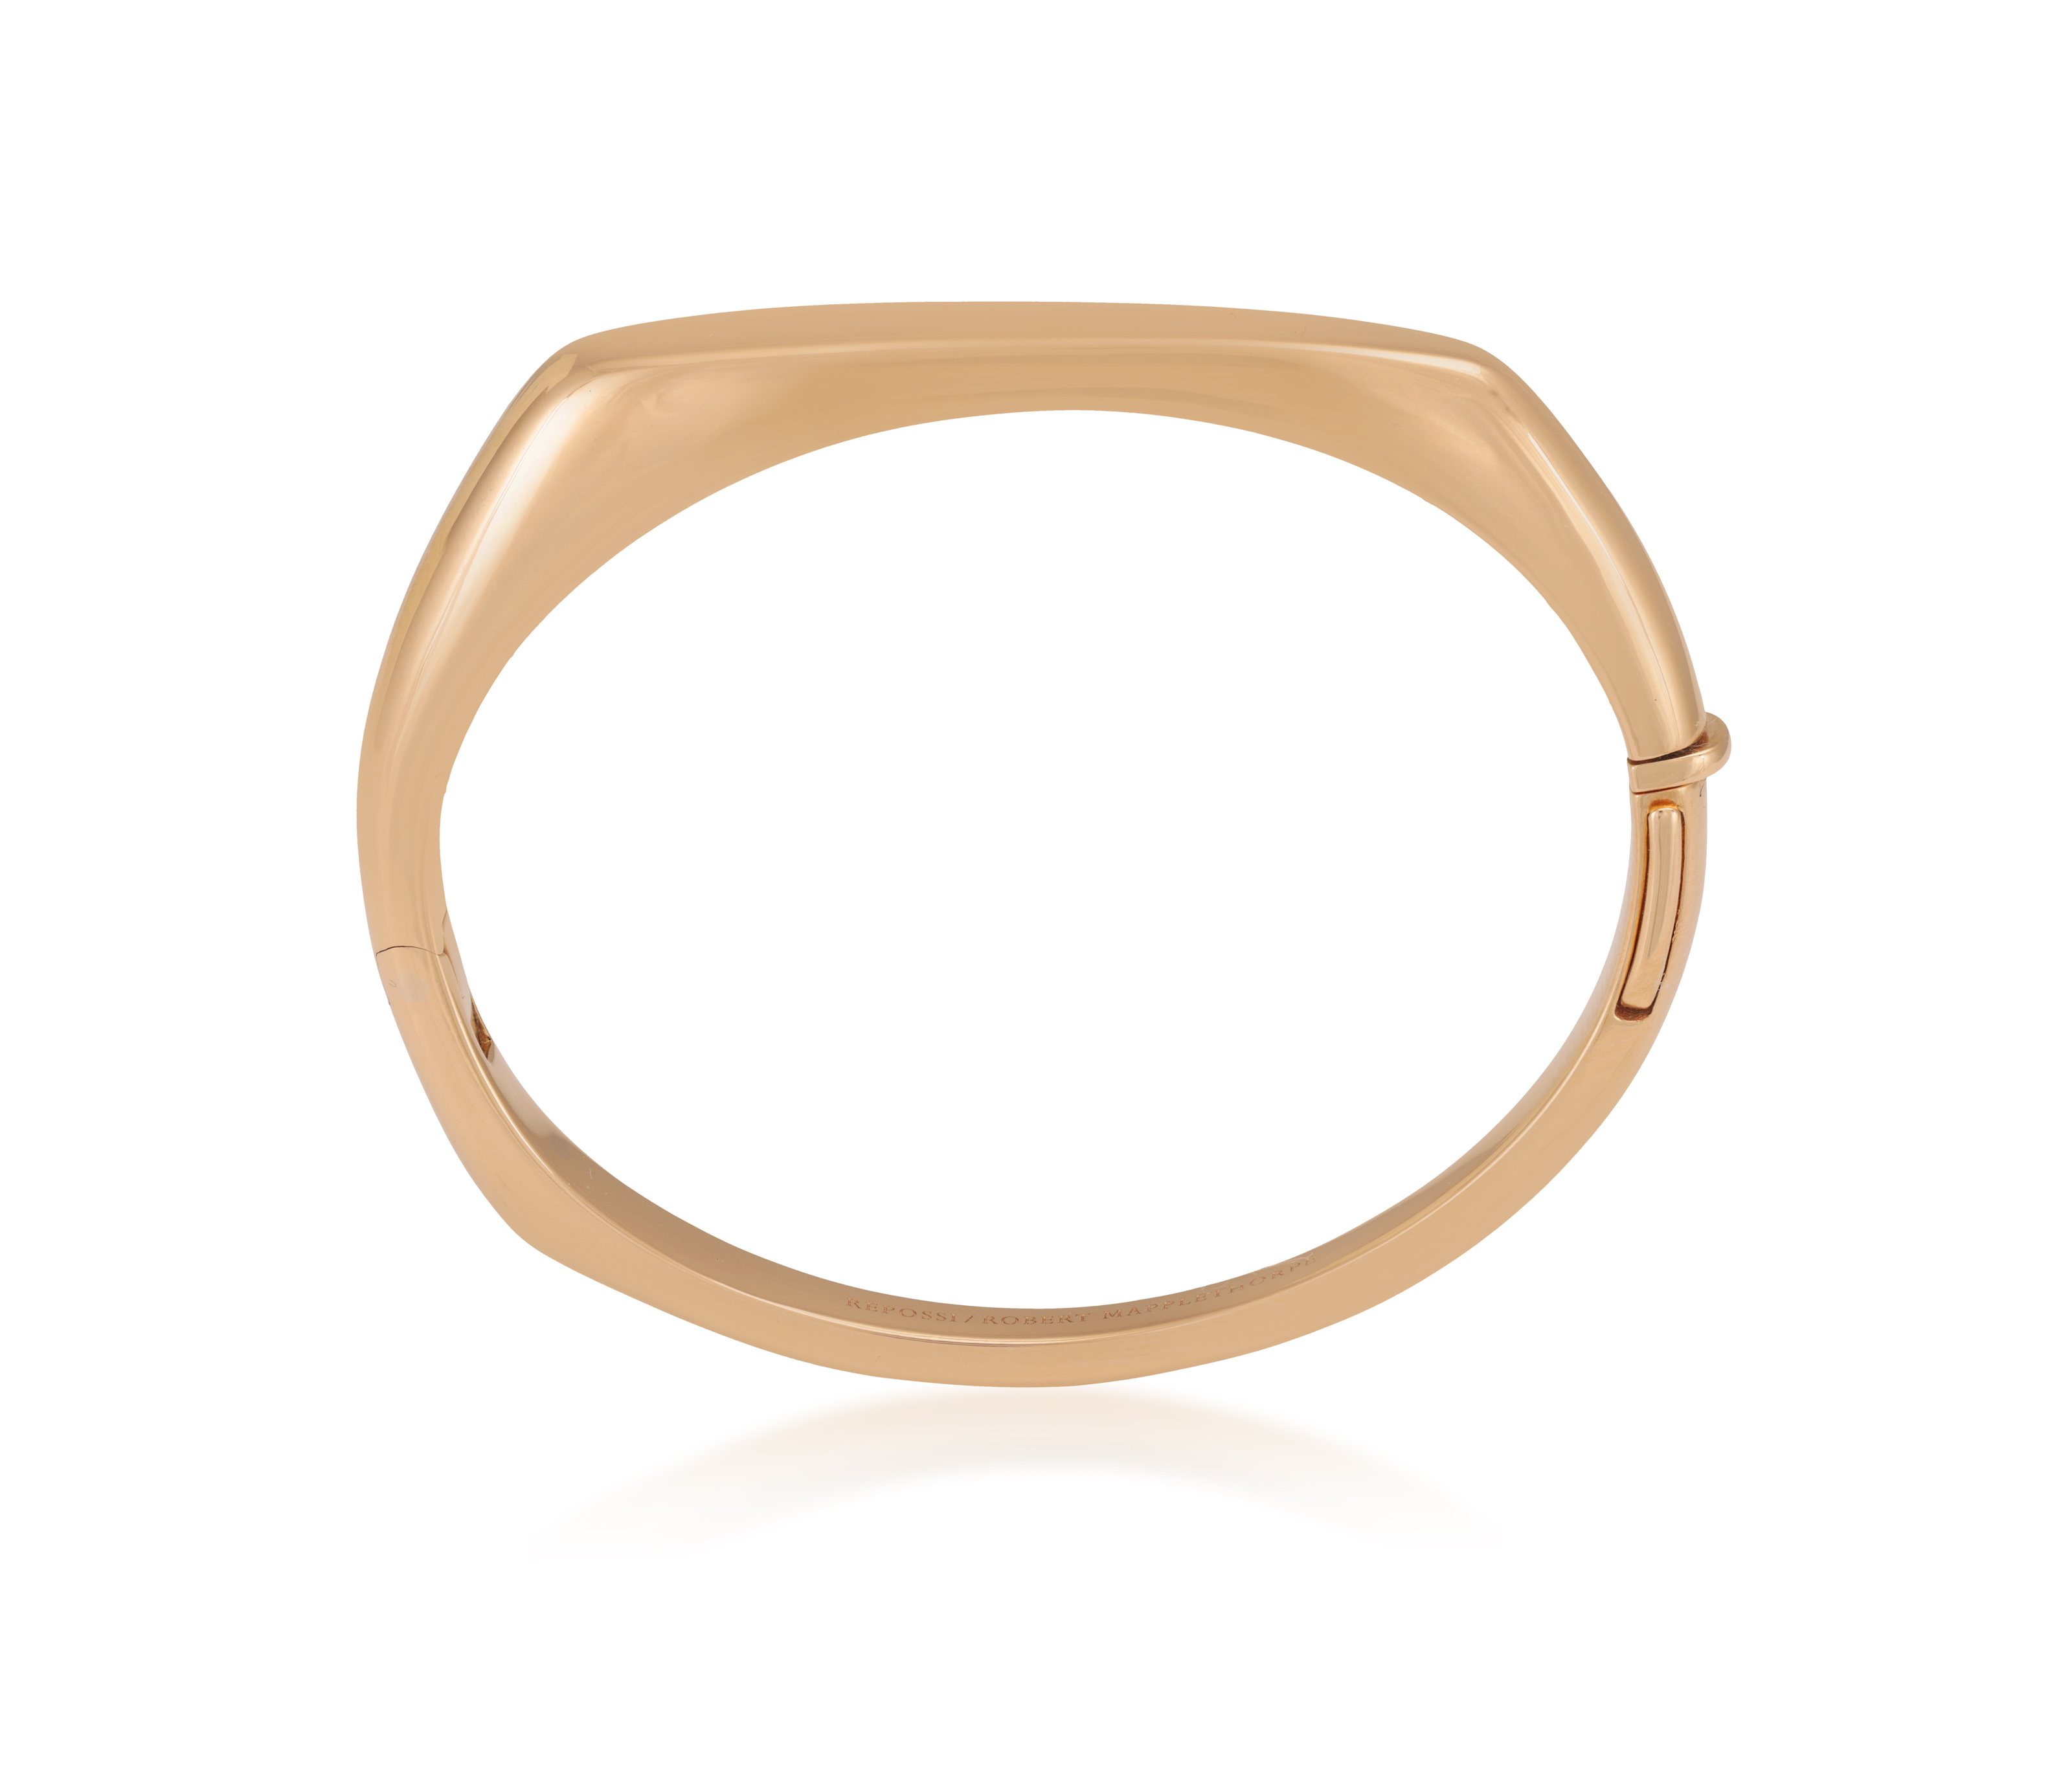 A GOLD 'ROBERT MAPPLETHORPE' BANGLE, DESIGNED BY GAIA REPOSSI, FOR REPOSSI Limited Edition, - Image 2 of 8